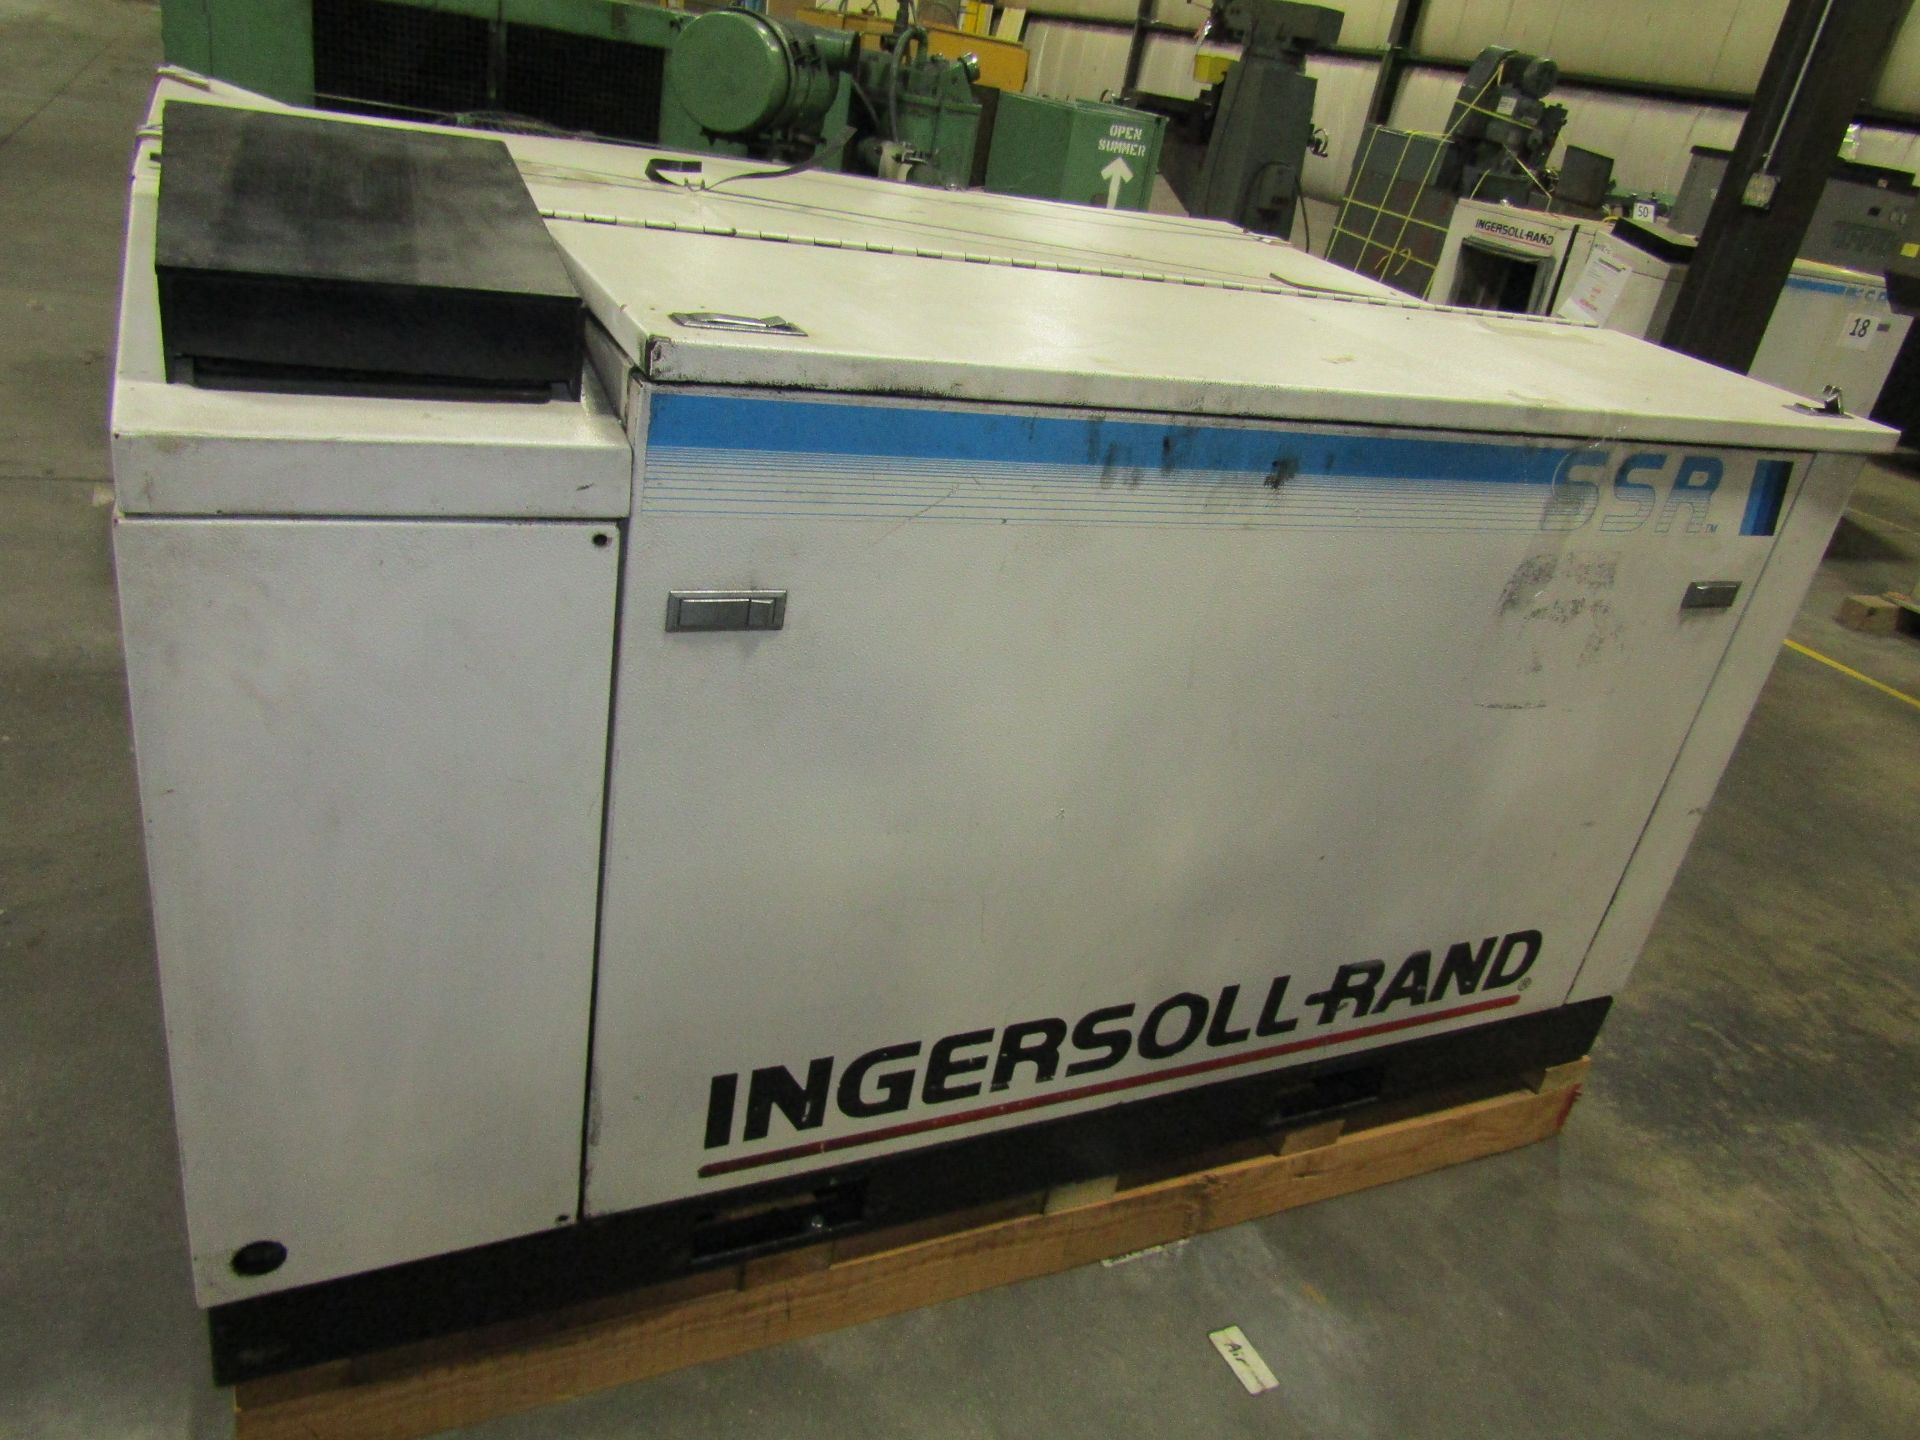 Ingersoll-Rand SSR Air Compressor S#: T75OUBO (Damaged Screw) - Image 3 of 4